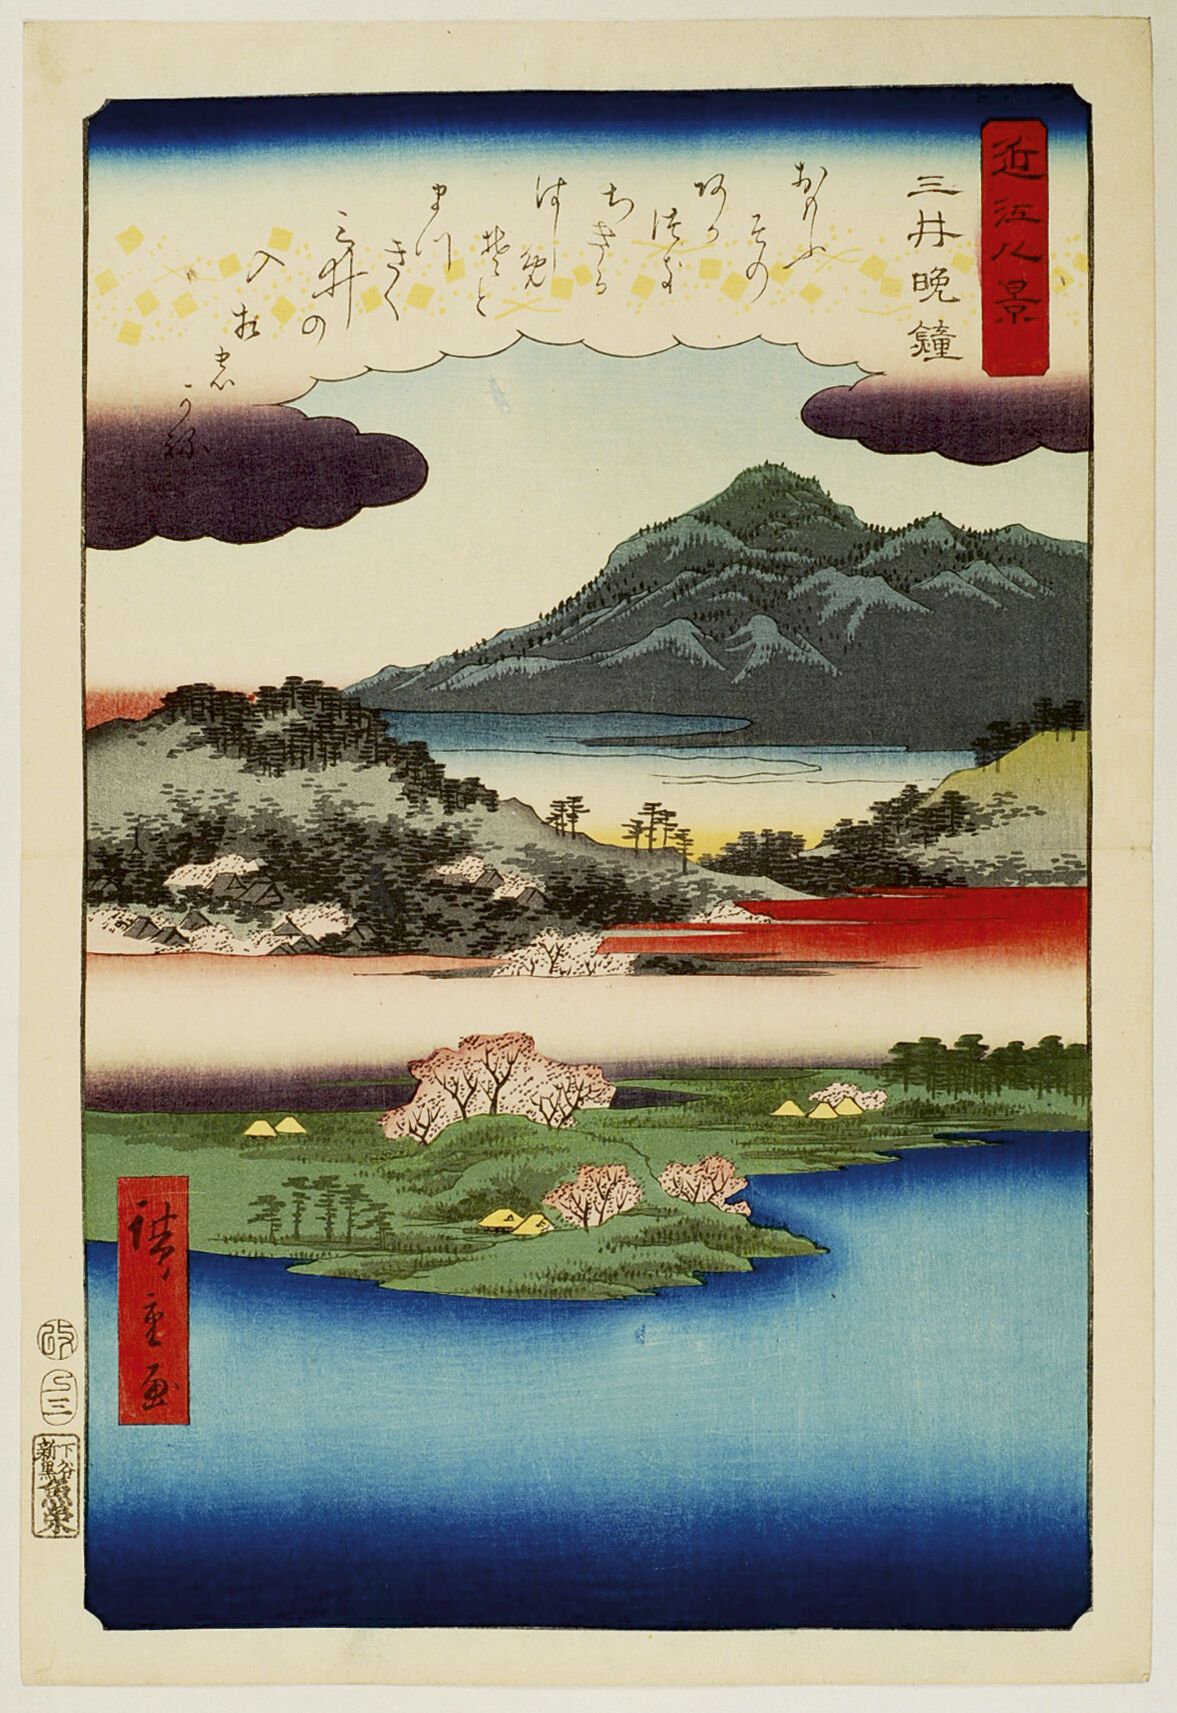 Null 宇川广重 (1797-1858)
Oban tate-e from the series Ômi hakkei, the eight views of&hellip;